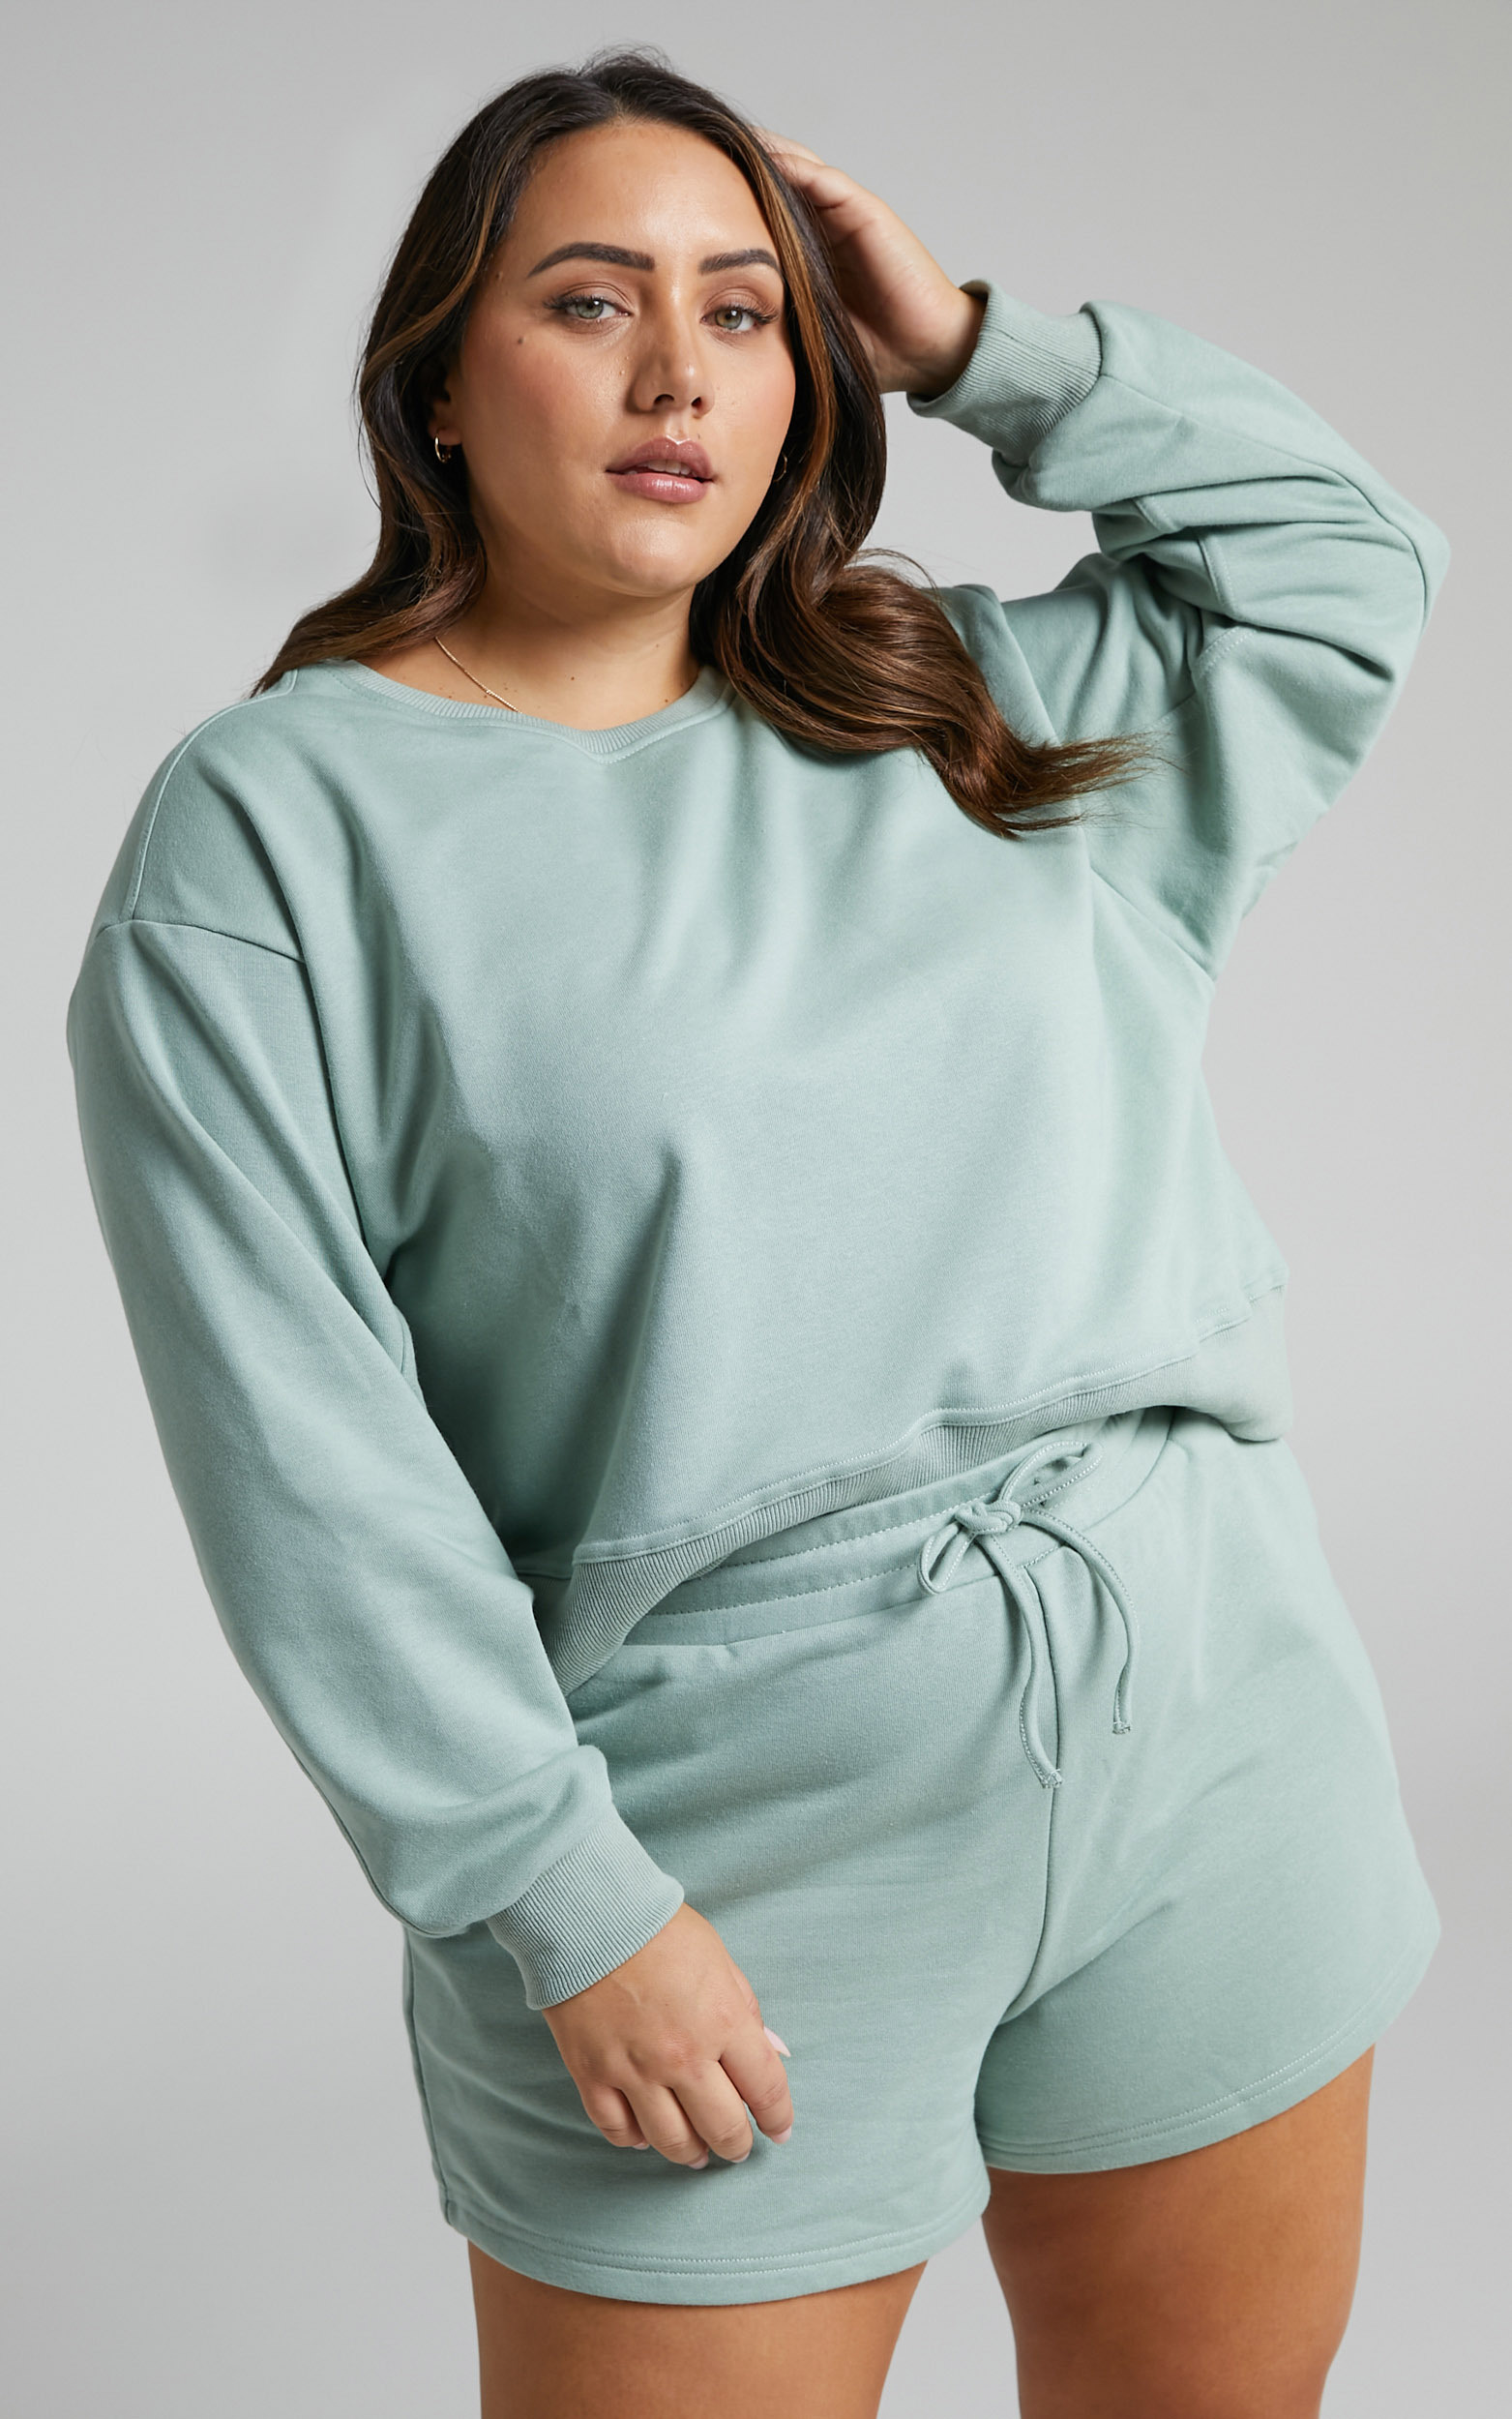 Jensome Boxy Fit Sweater in Jersey in Sage - 04, GRN1, hi-res image number null